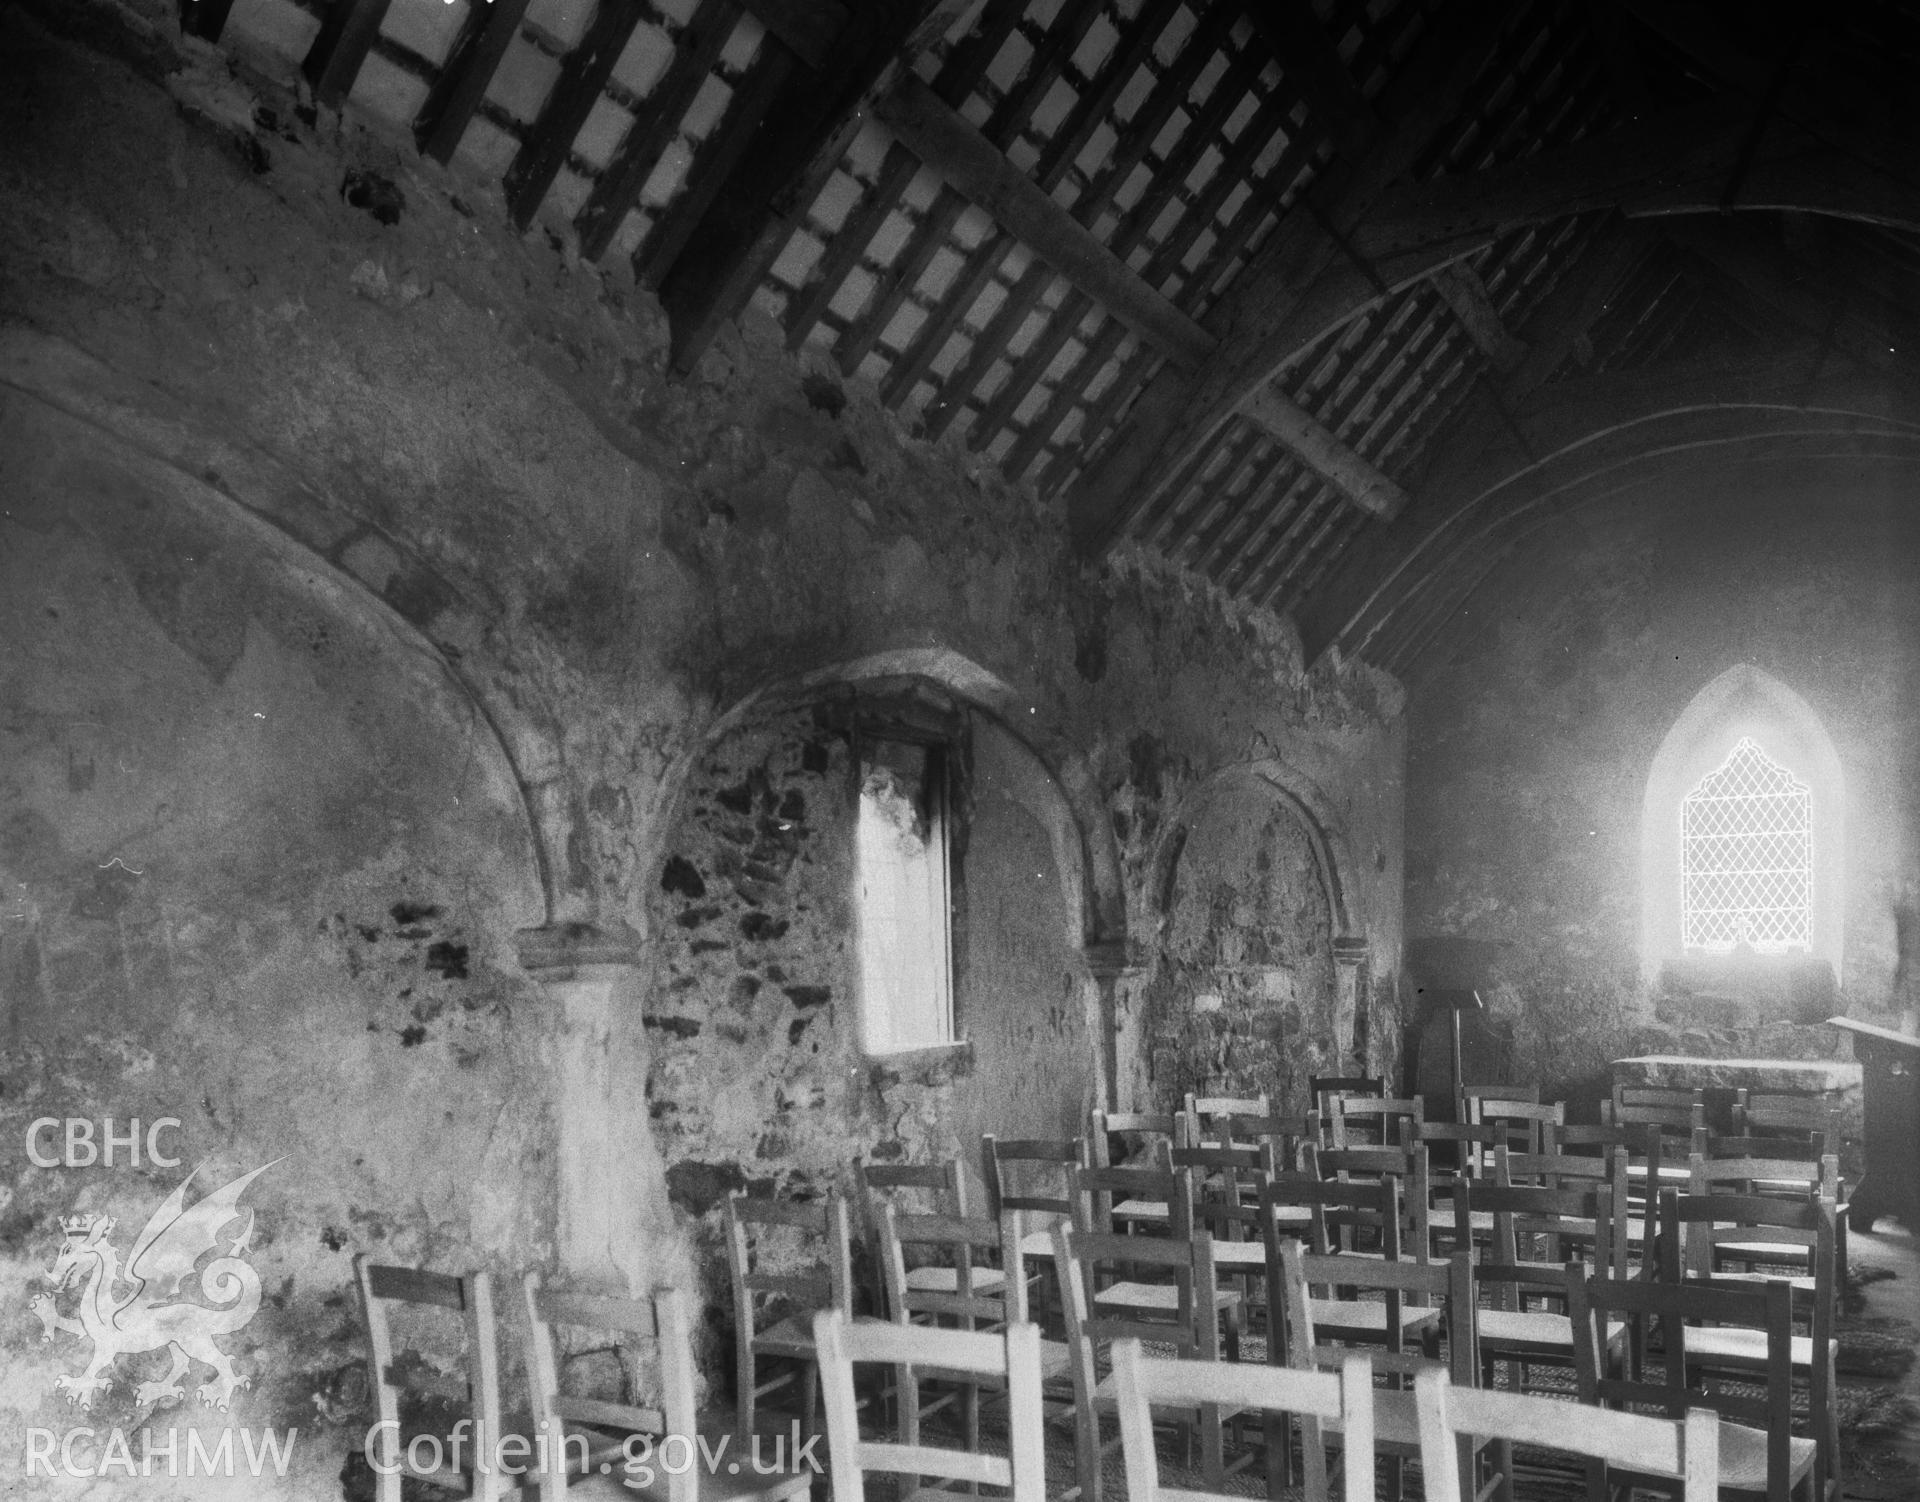 Digitised copy of a black and white negative showing interior of St Cwyfan's Church, produced by RCAHMW before 1960